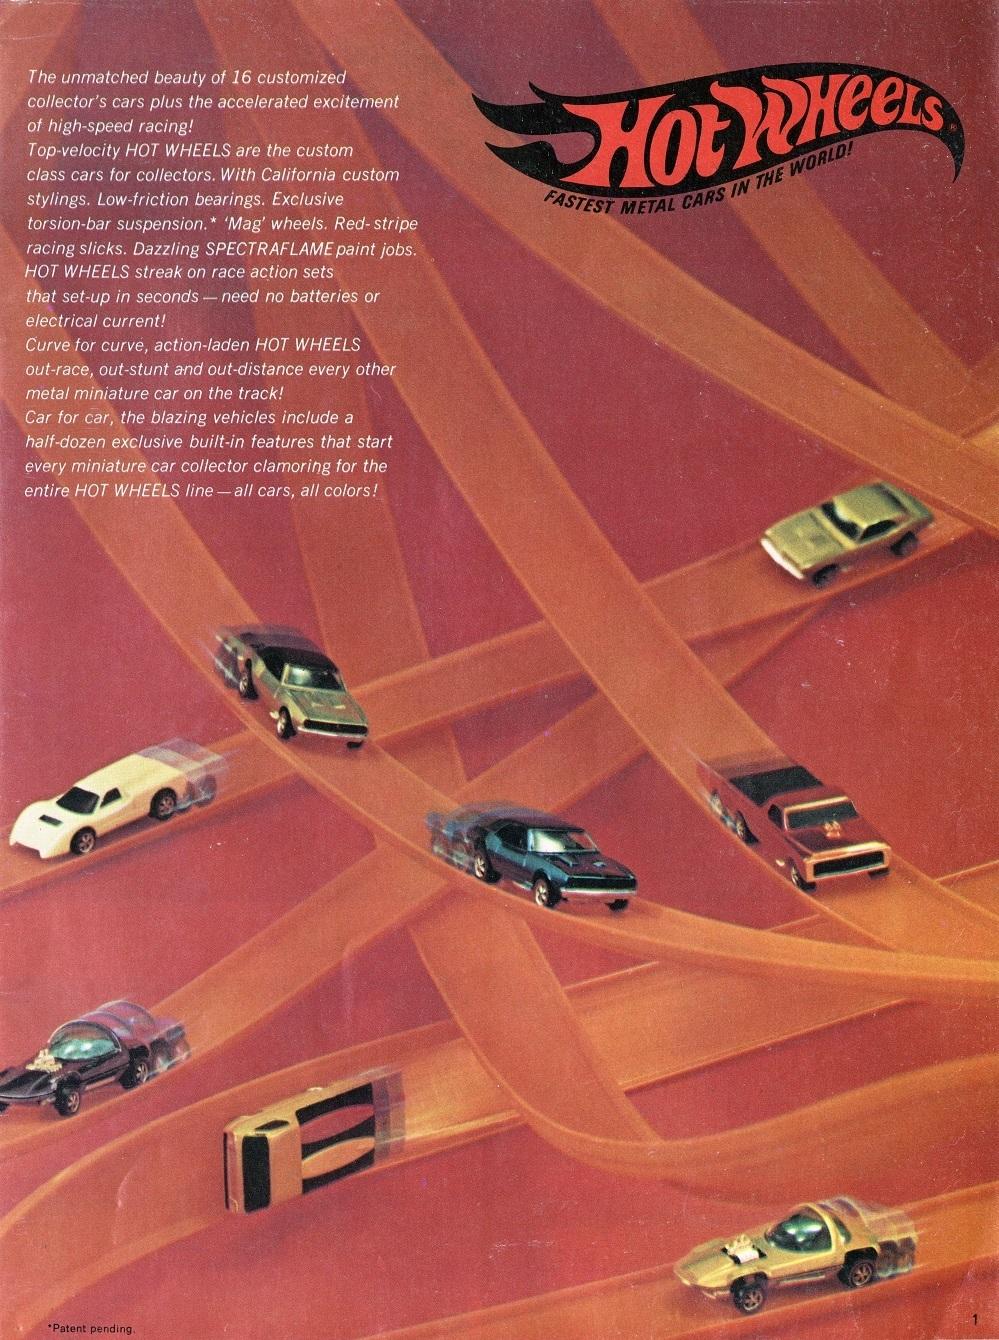 An early Hot Wheels advertisement featuring some of its original cars.